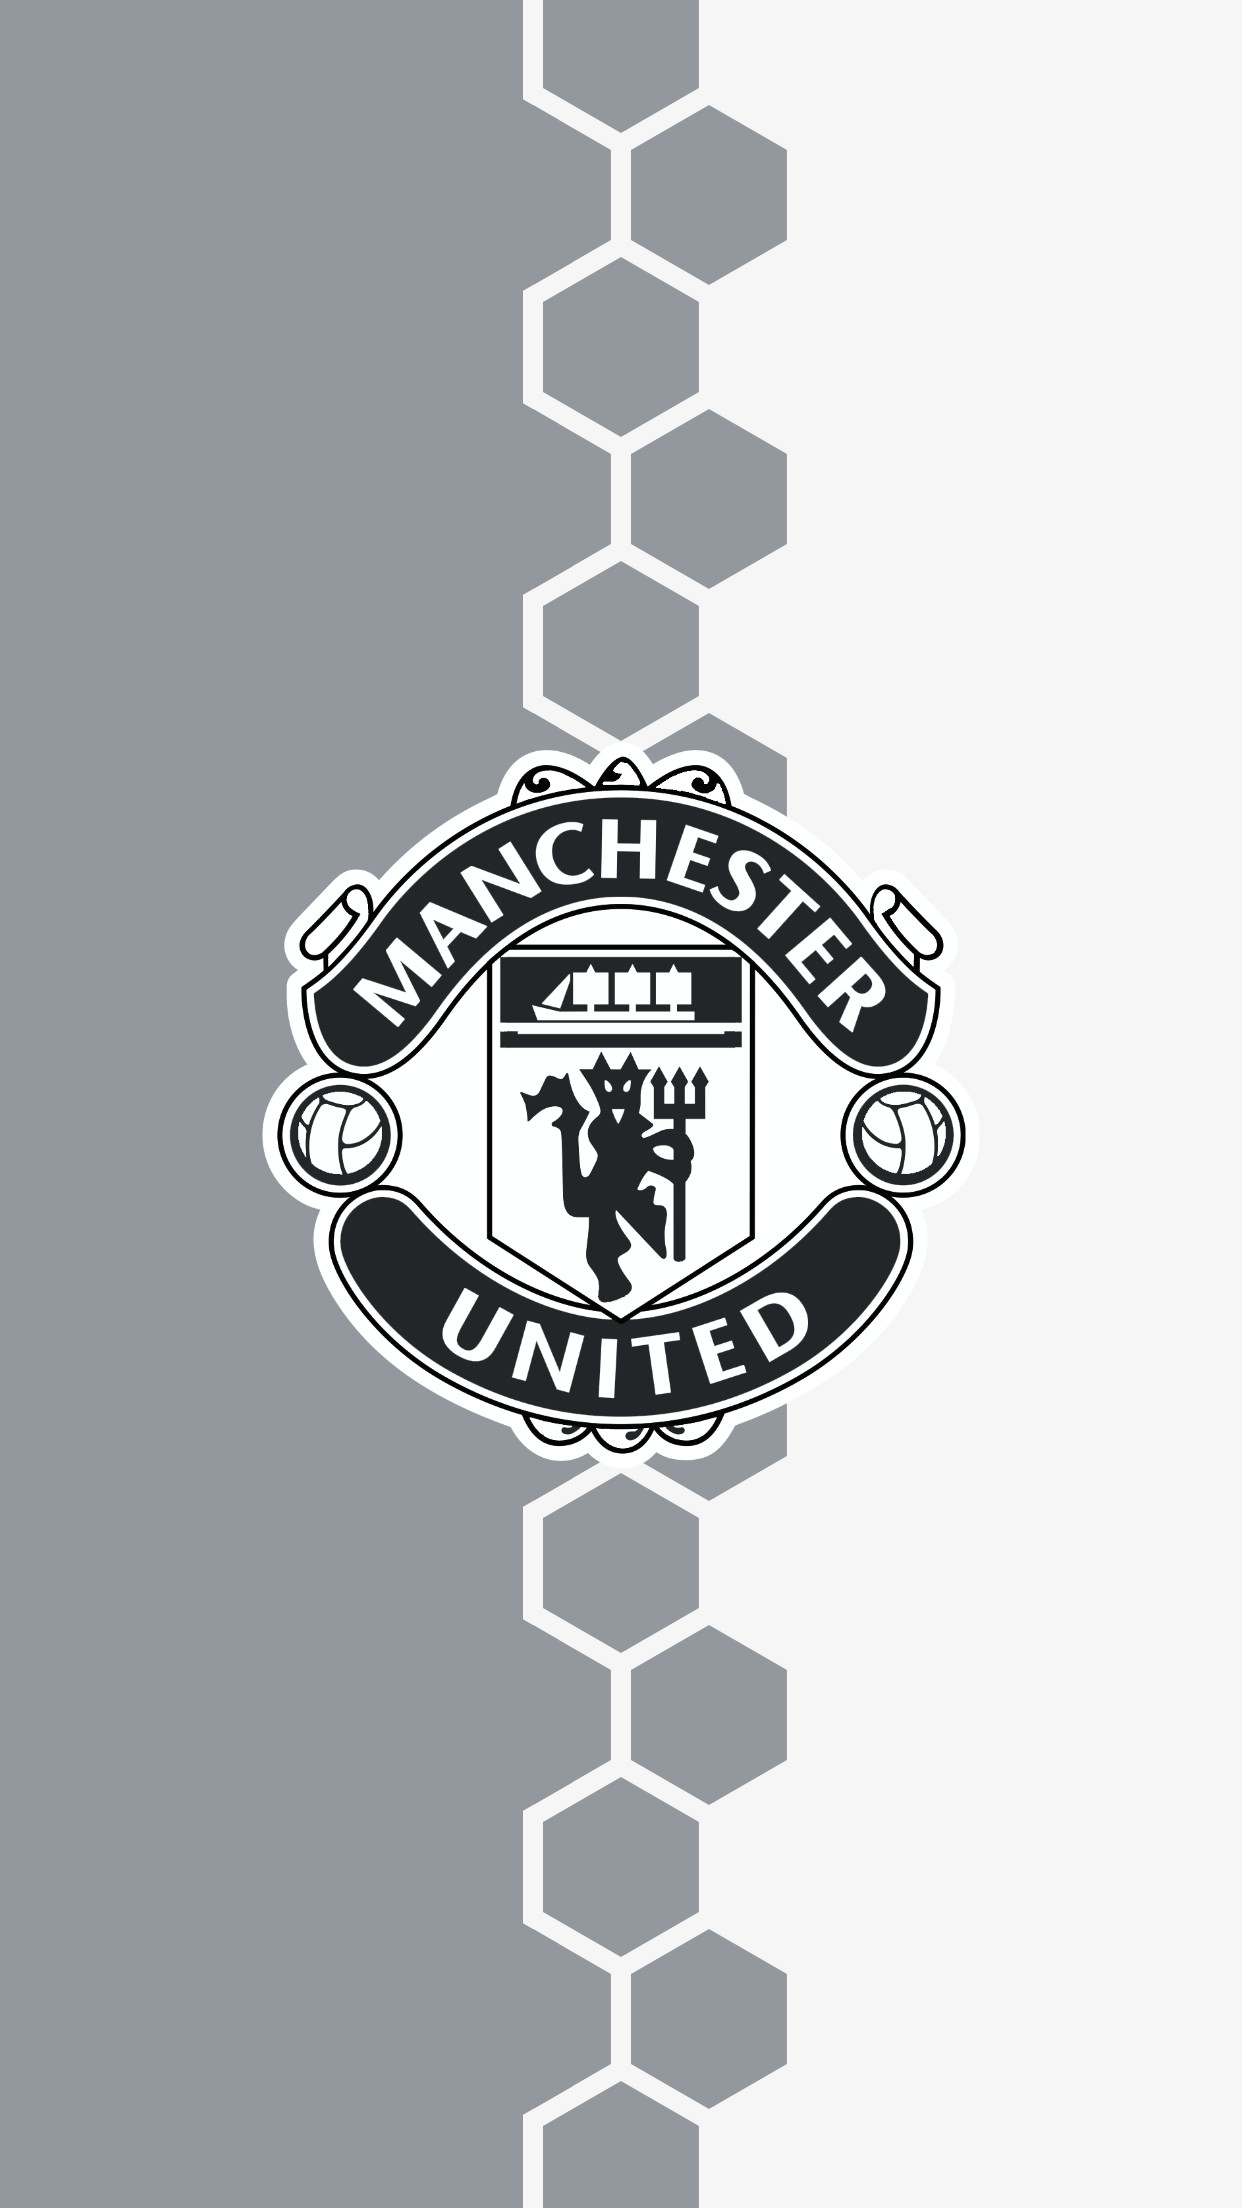 Adidas Manchester United Wallpapers